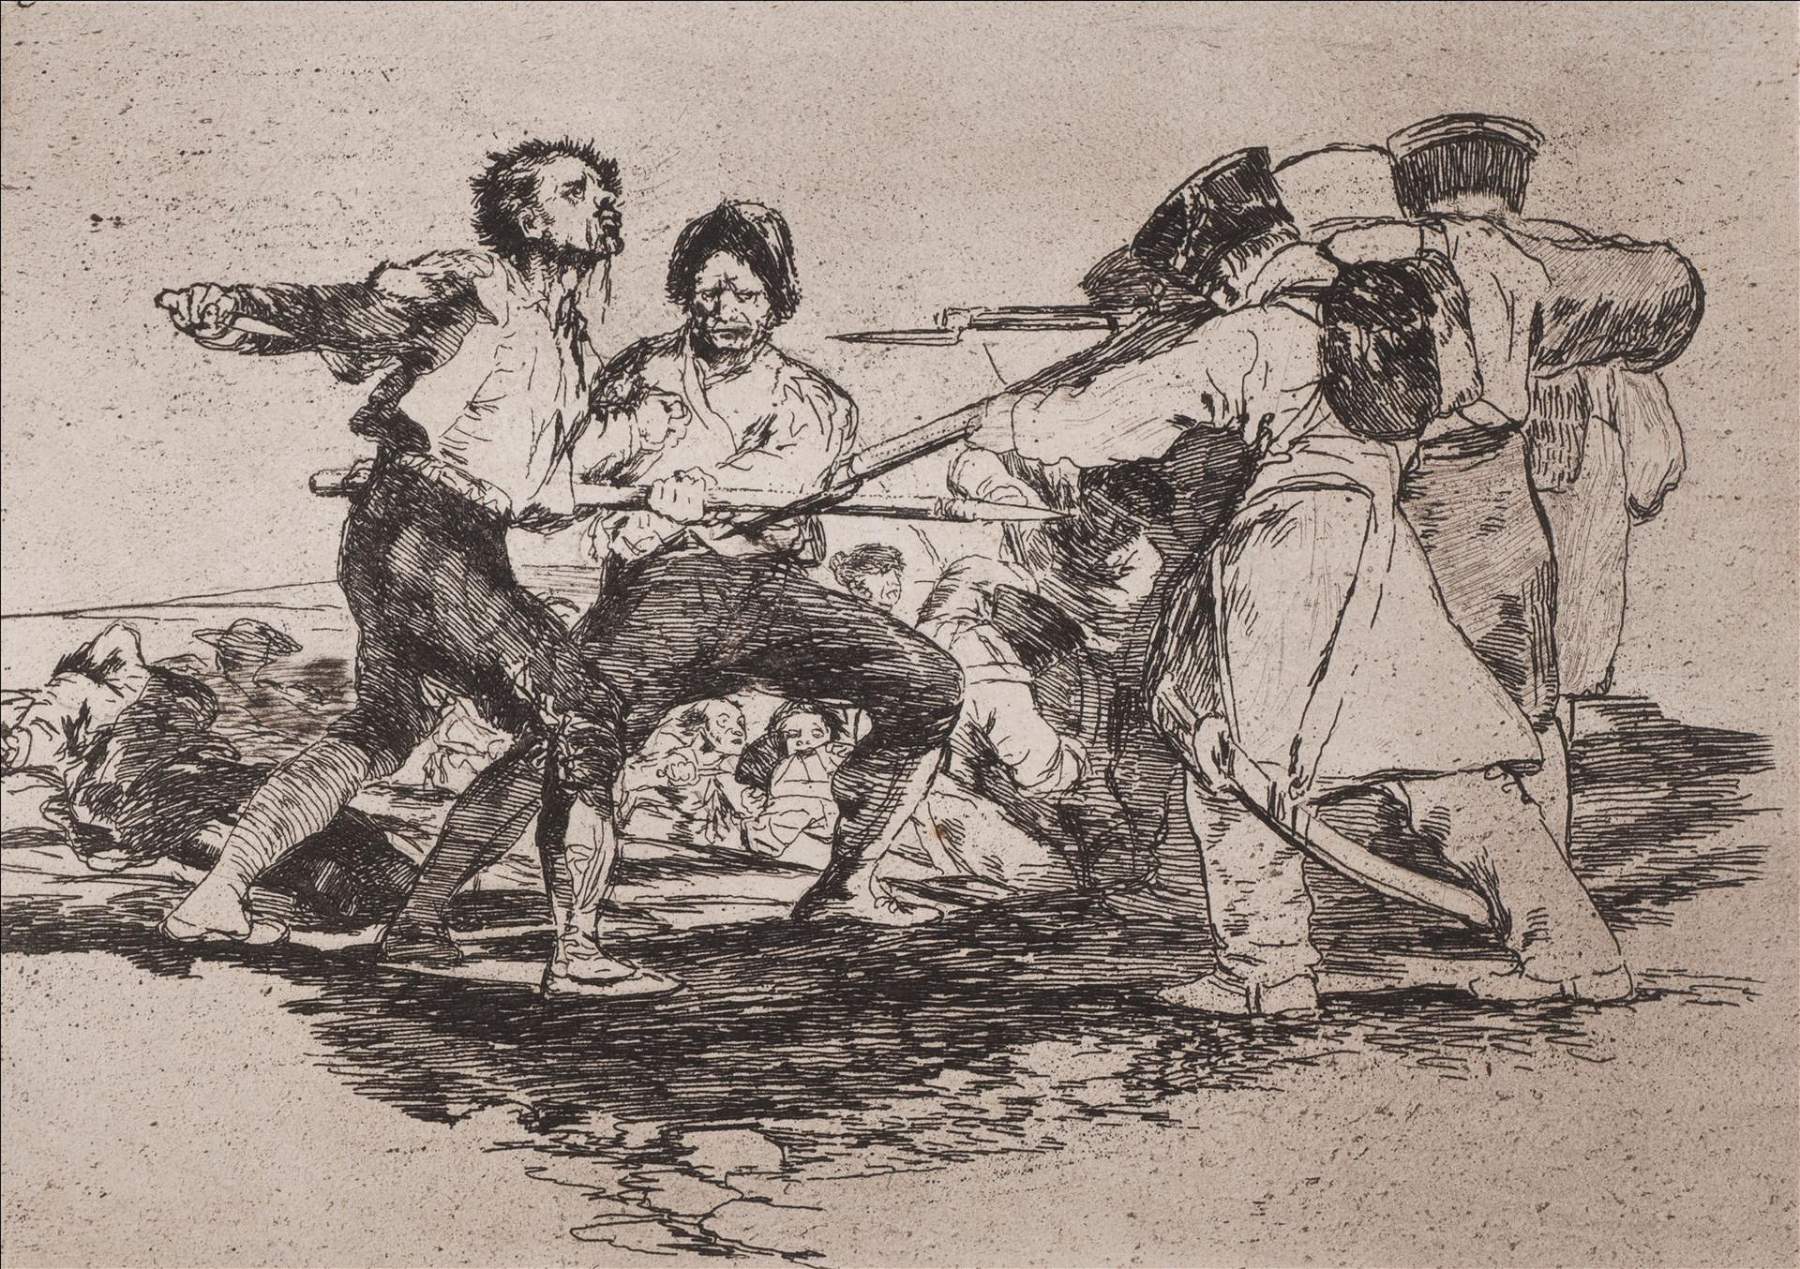 An exhibition at Rivoli Castle on artists at war, from Goya to Ukraine